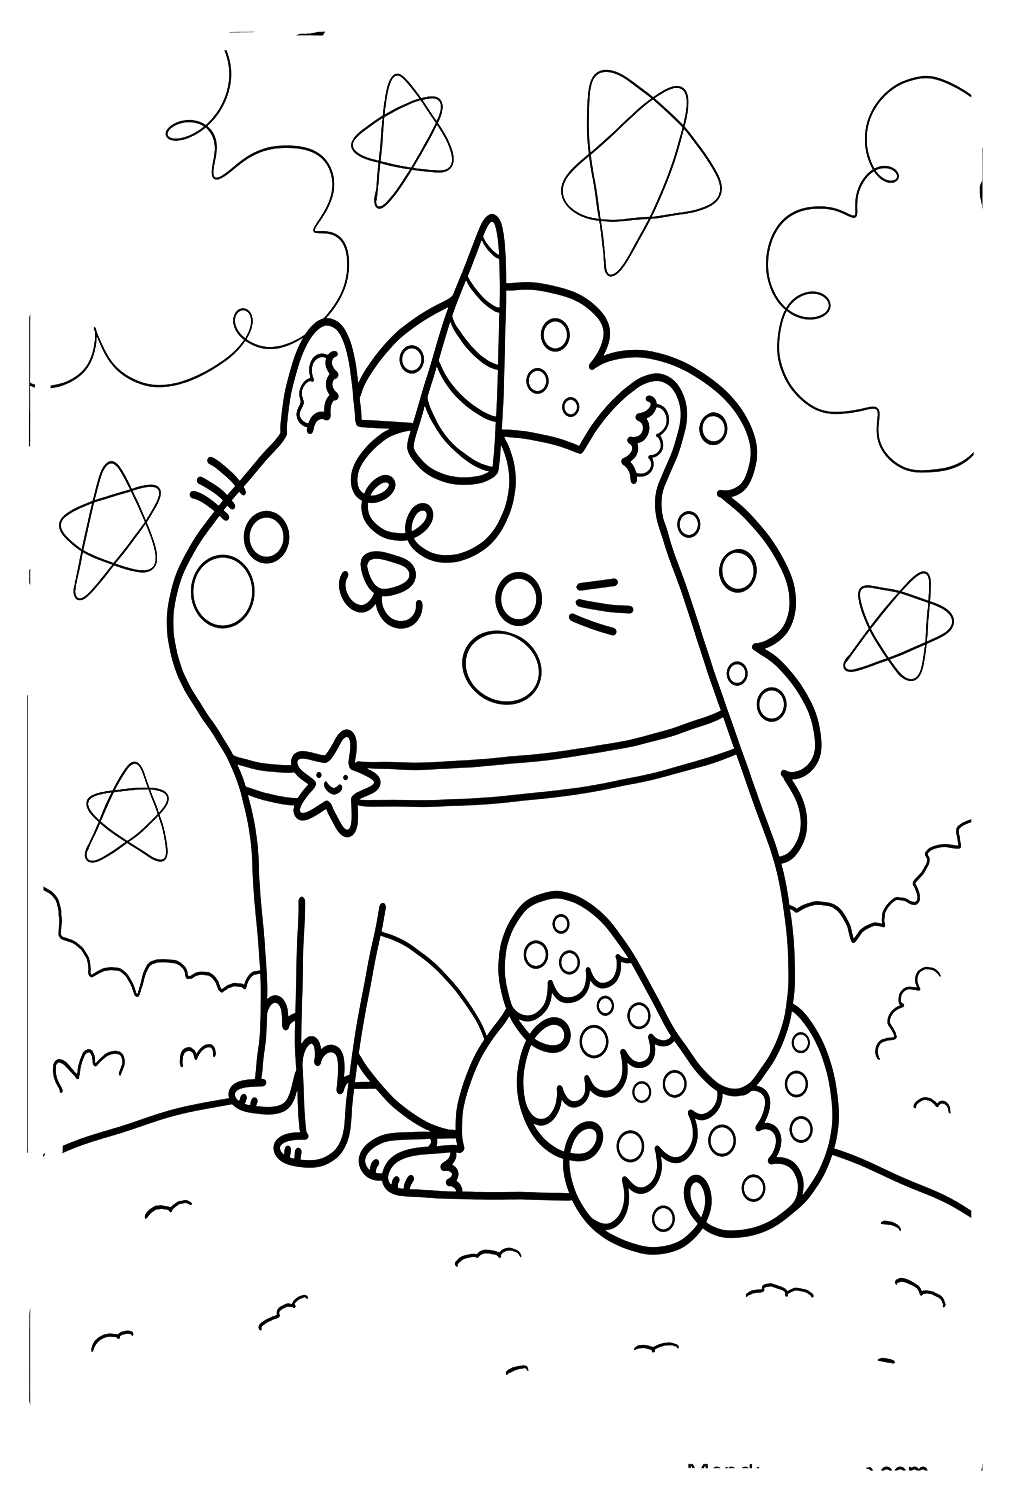 Cat Unicorn Coloring Page - Free Printable Coloring Pages